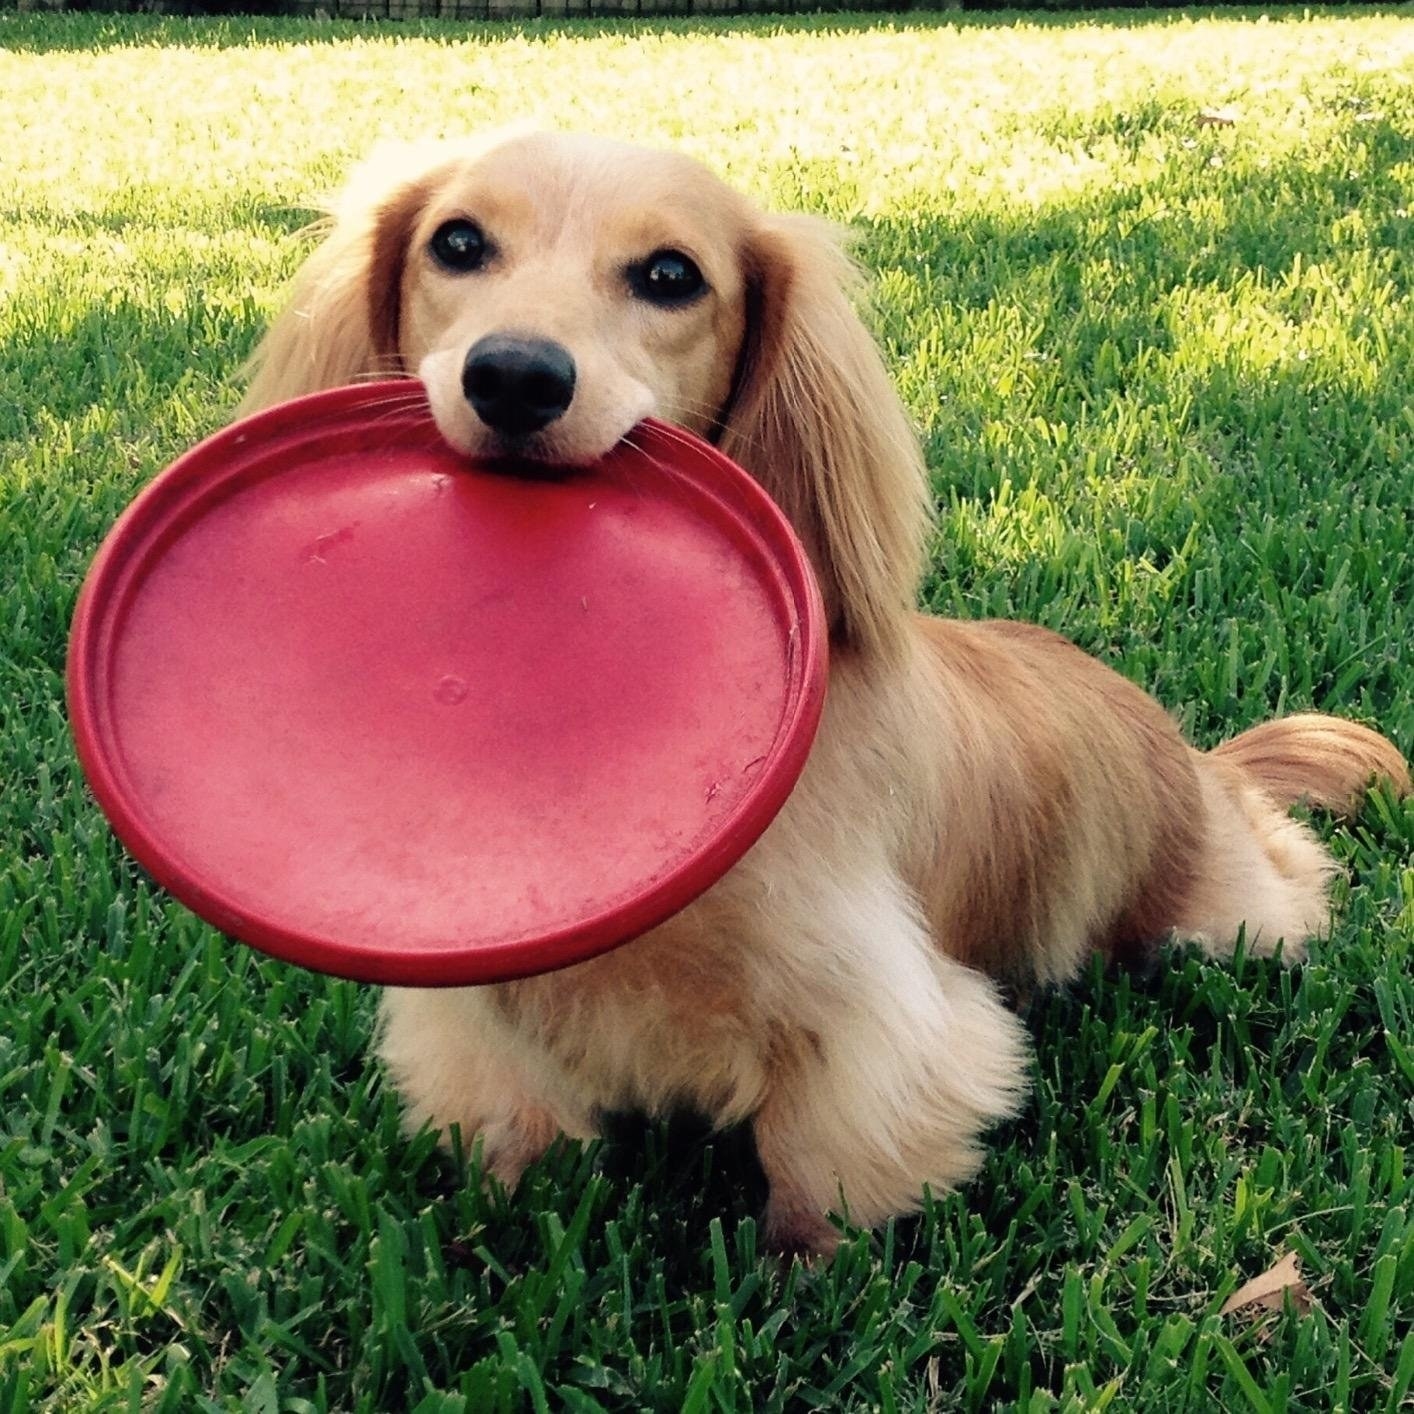 Reviewer photo of their dachshund holding the flying disc in its mouth